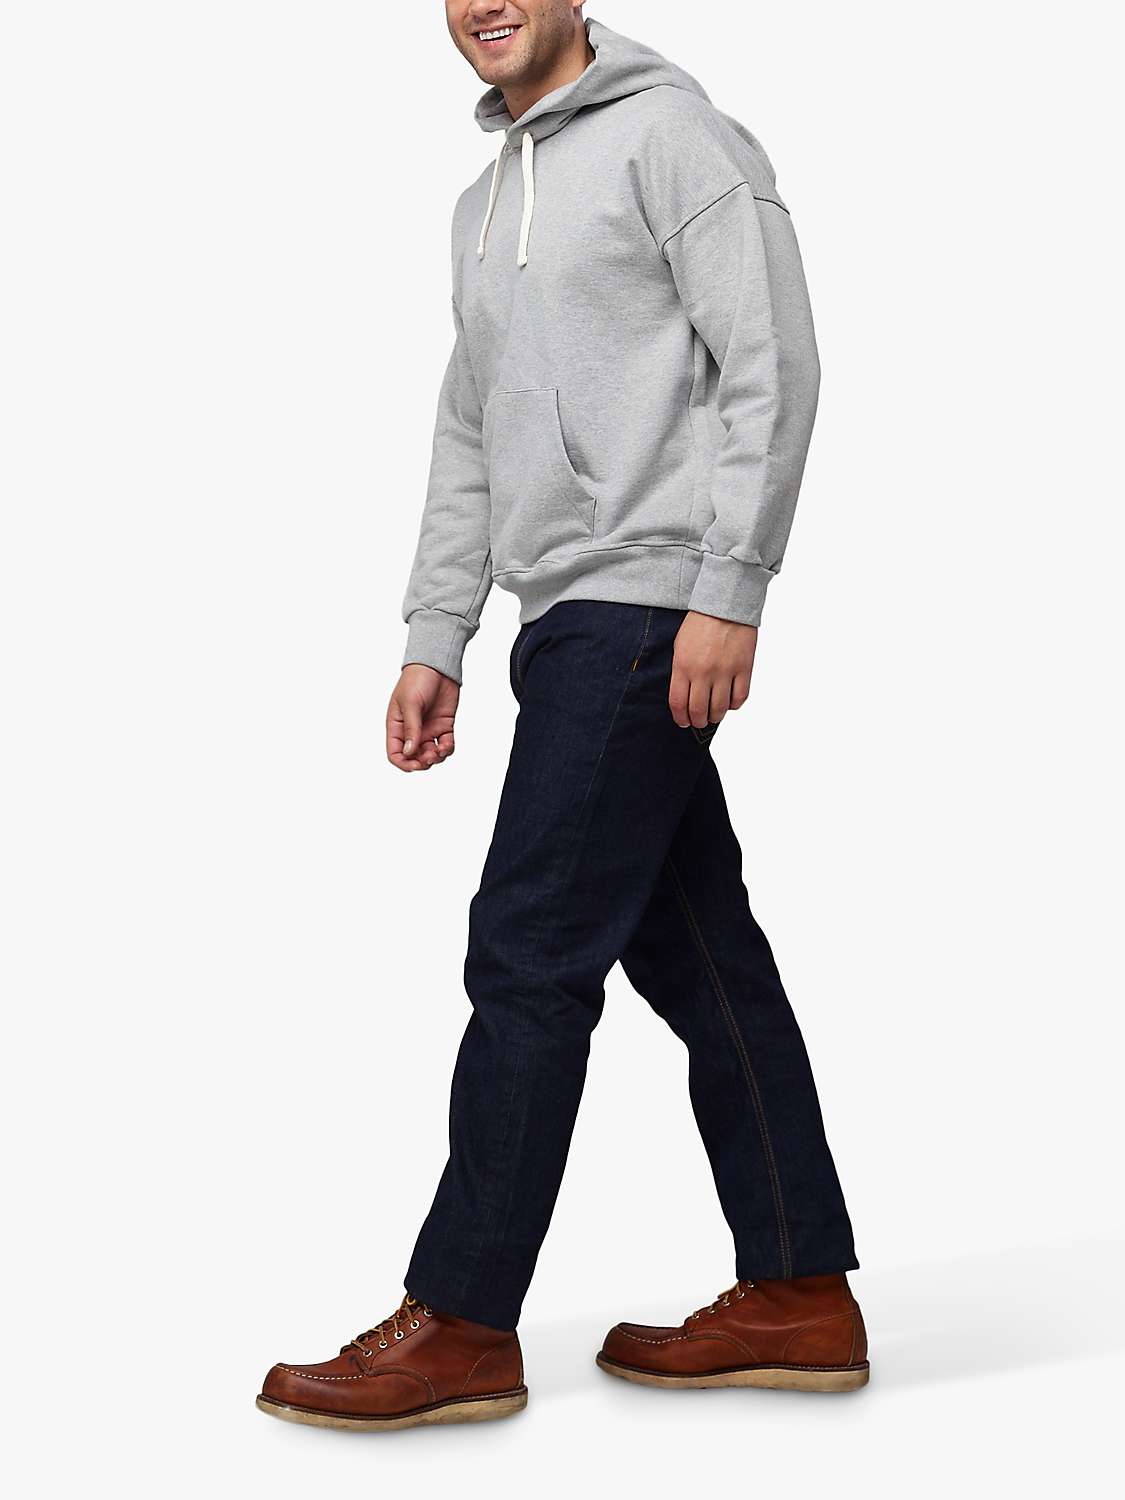 Buy Community Clothing Cotton Hoodie Online at johnlewis.com